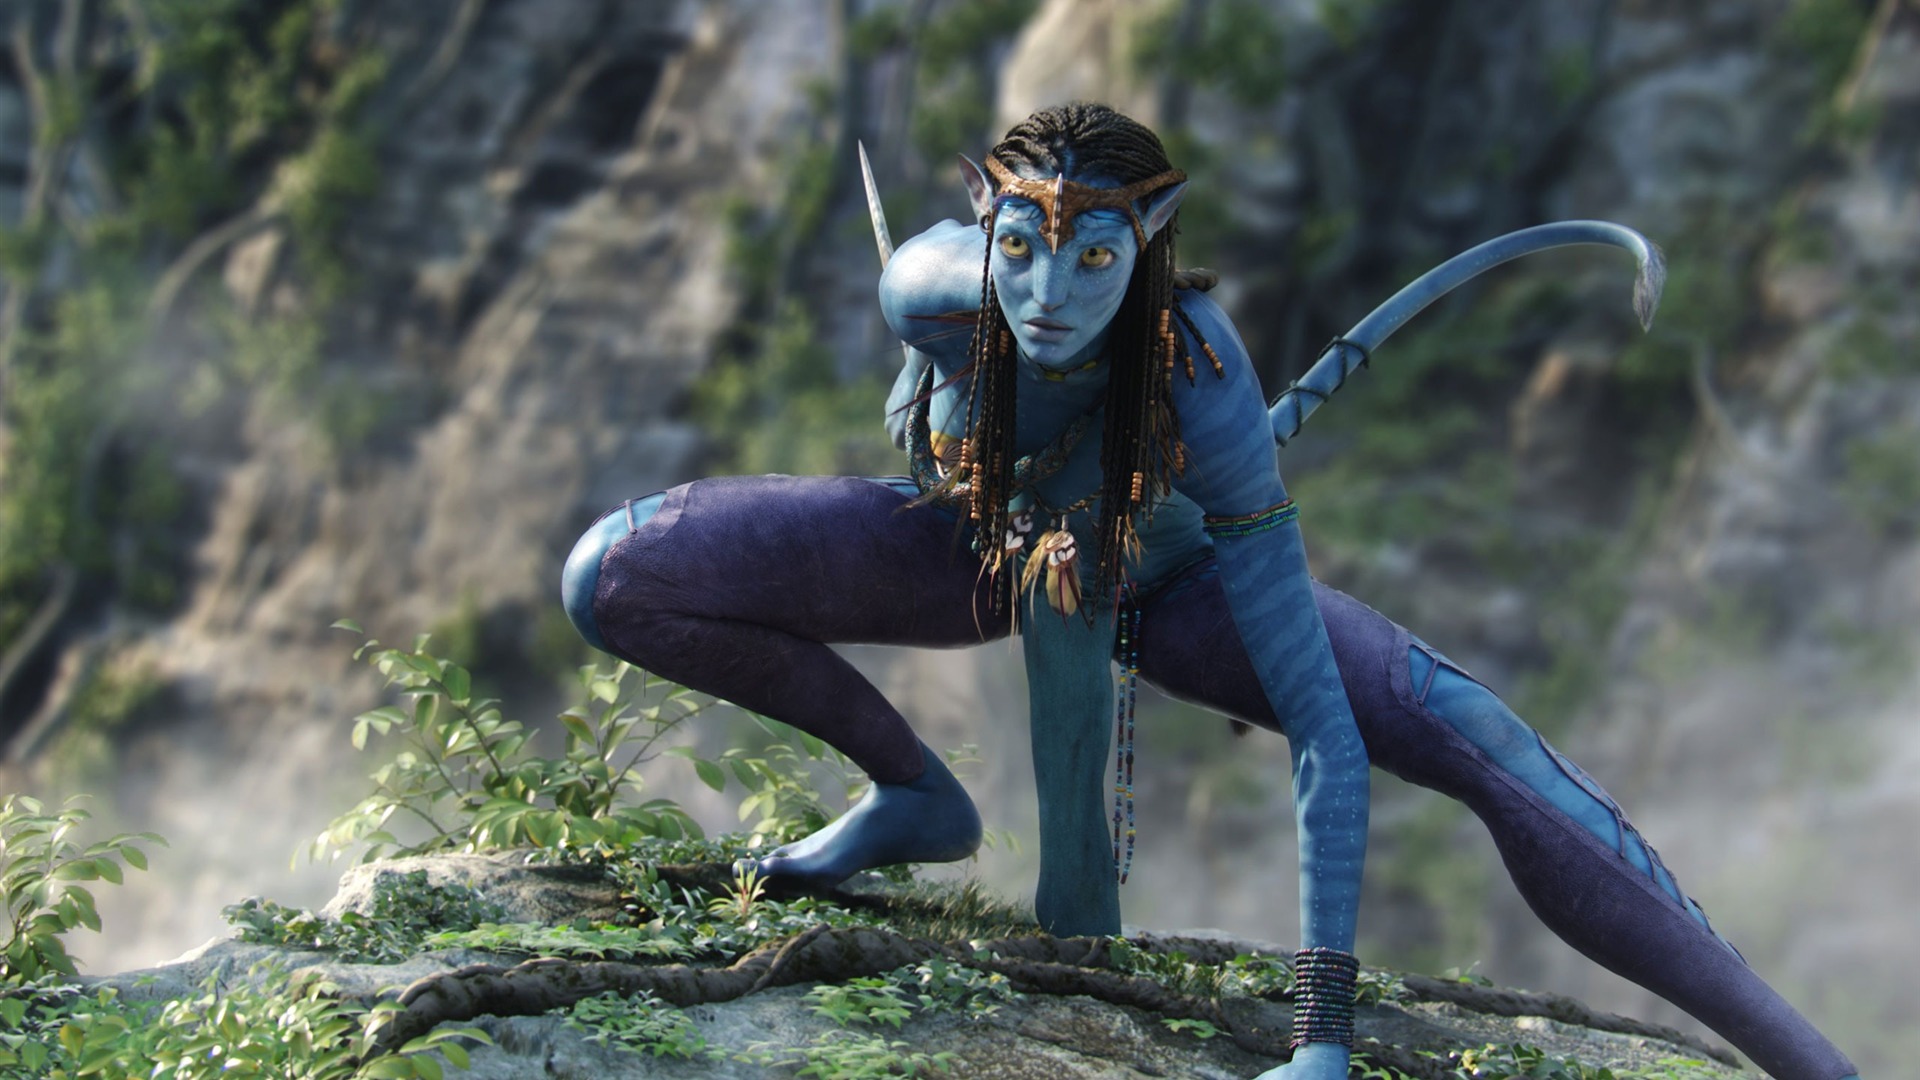  Classic Movie Avatar desktop wallpaper hd for mobile iPhone Pc